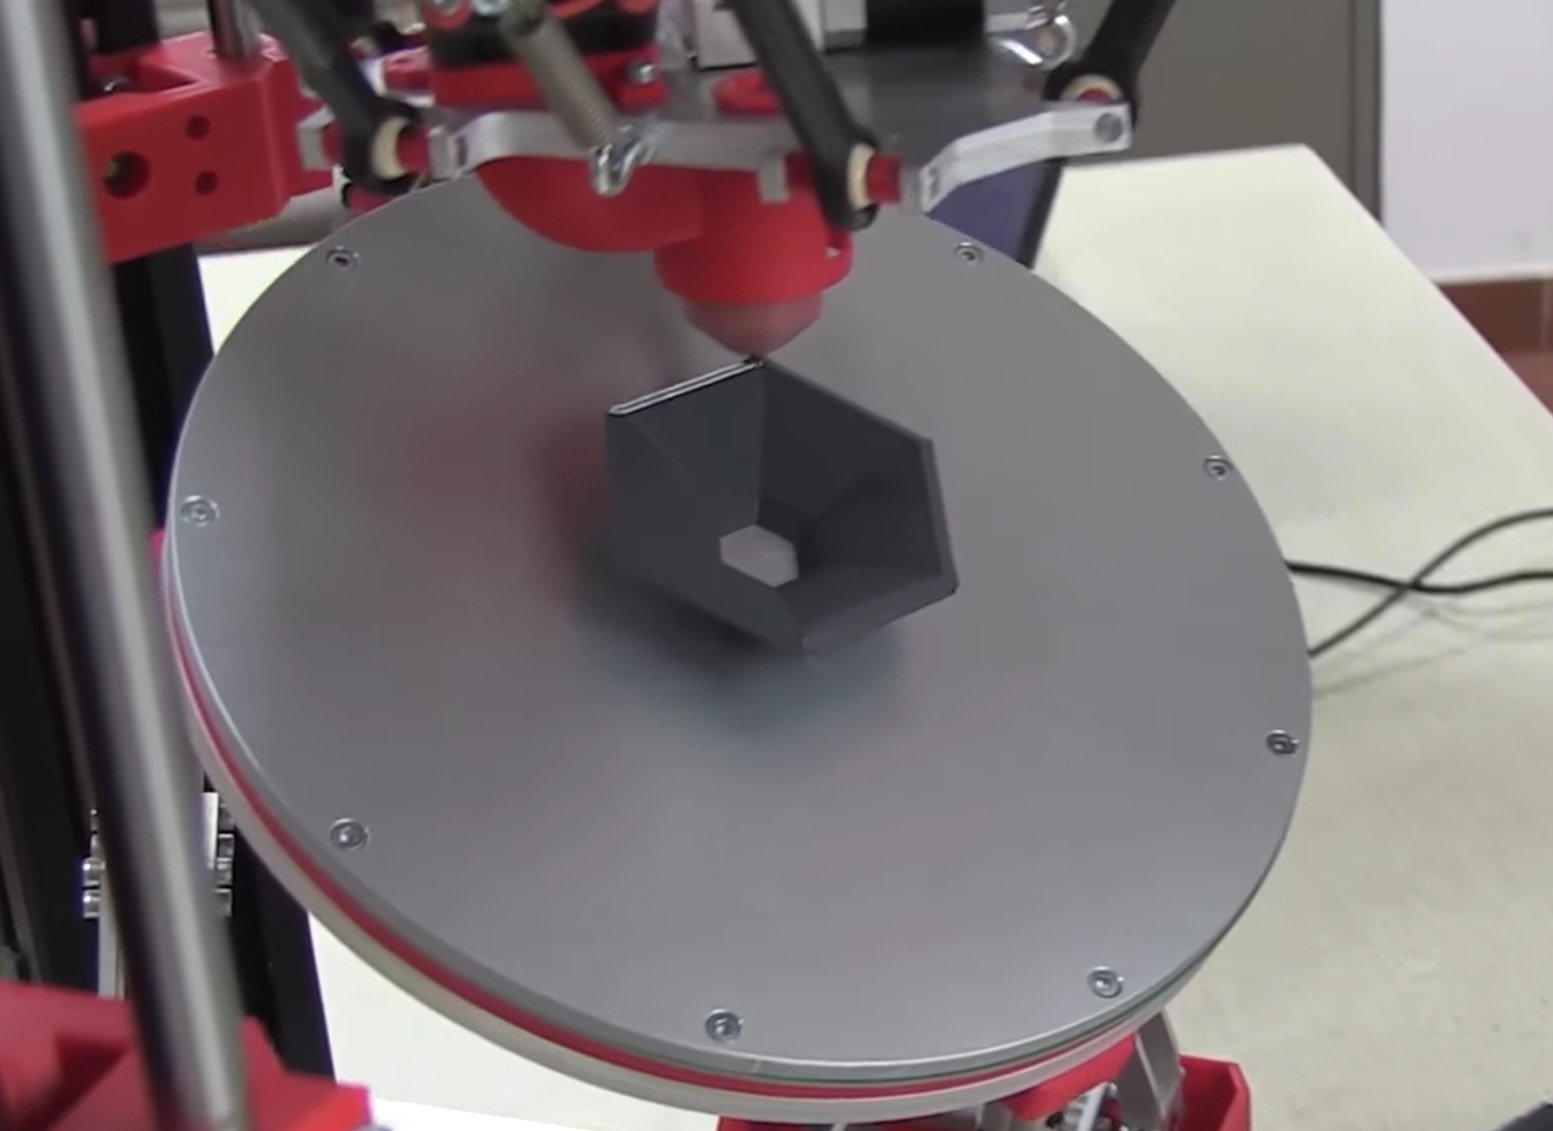  3D printing on an angle can eliminate overhangs 